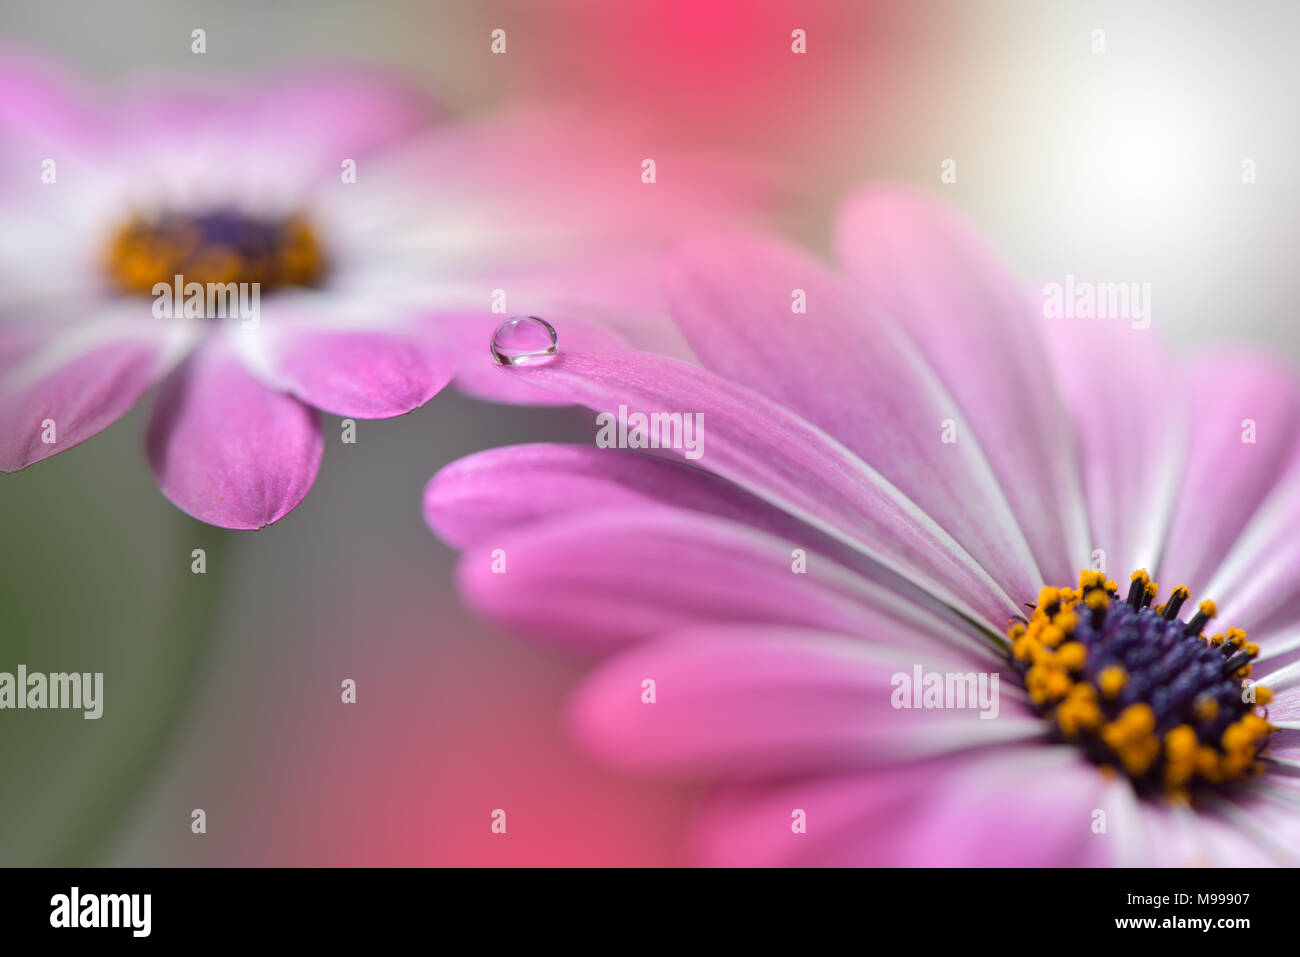 Gentle romantic artistic image. Soft pastel background blur .Reflection of the flower in the dew drop.Shallow depth of field.Modern art.Close up.Flora Stock Photo